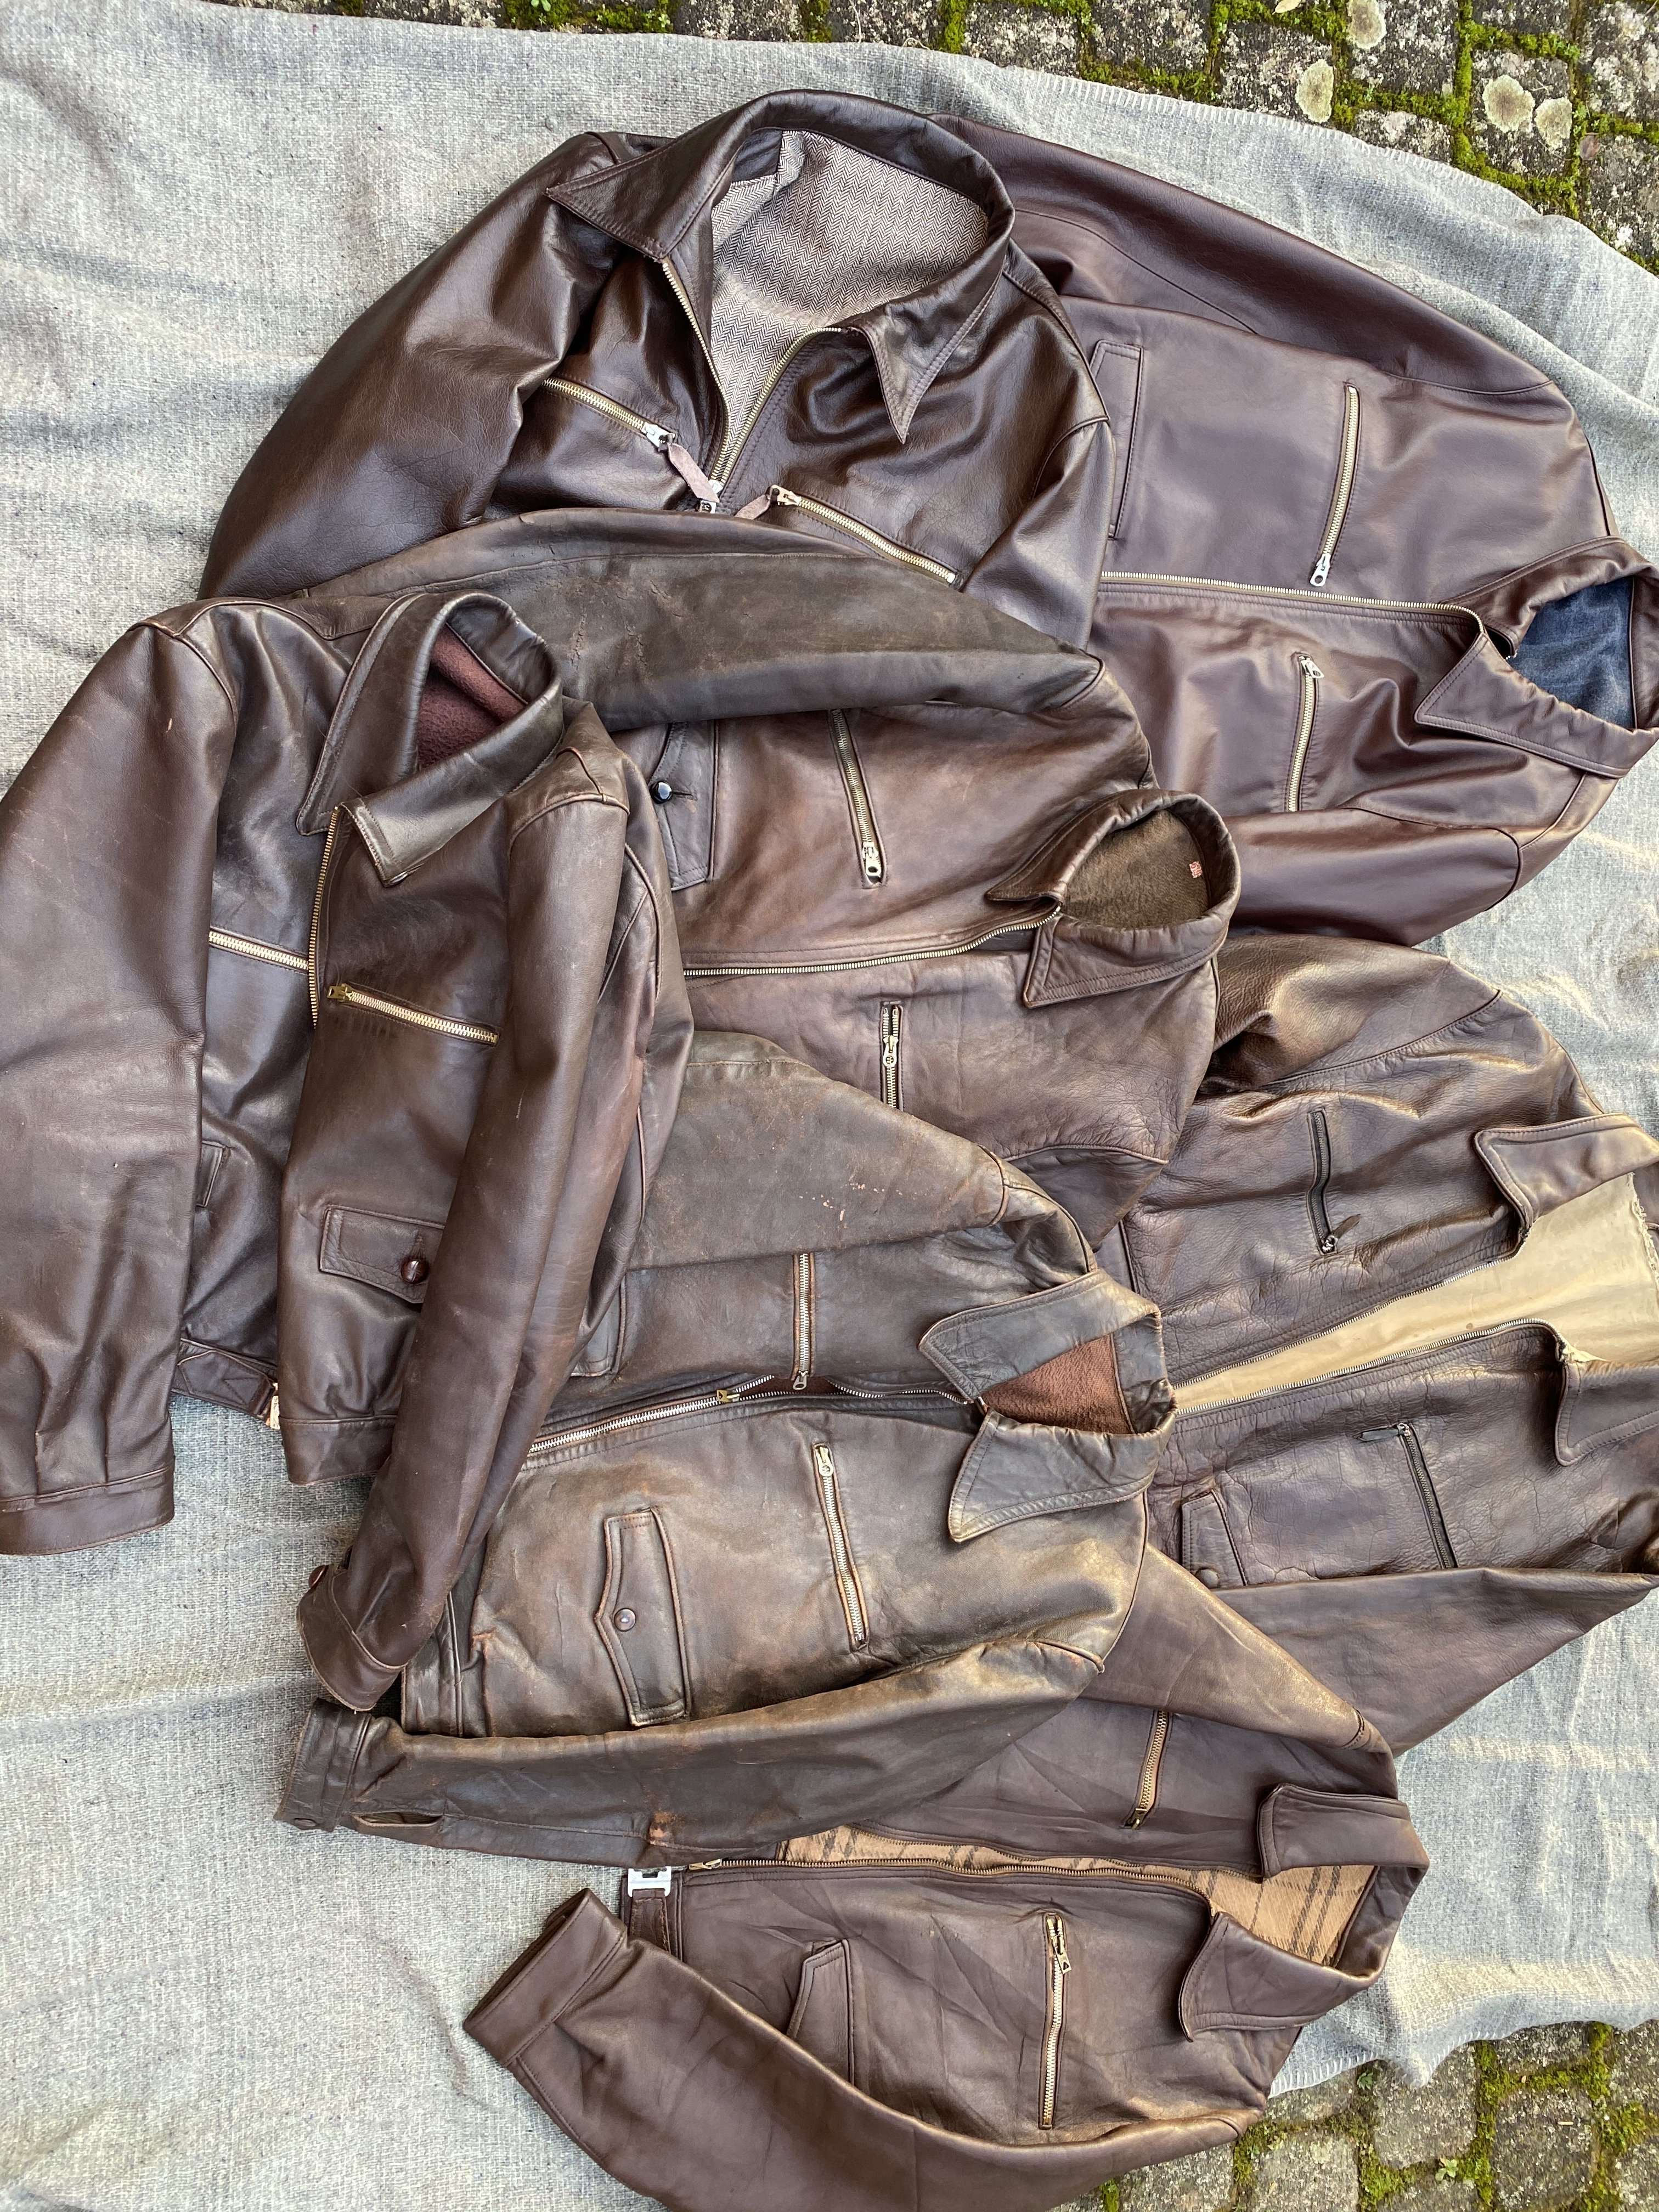 Condense Civilian water the flower German leather flight jackets | Page 2 | Vintage Leather Jackets Forum